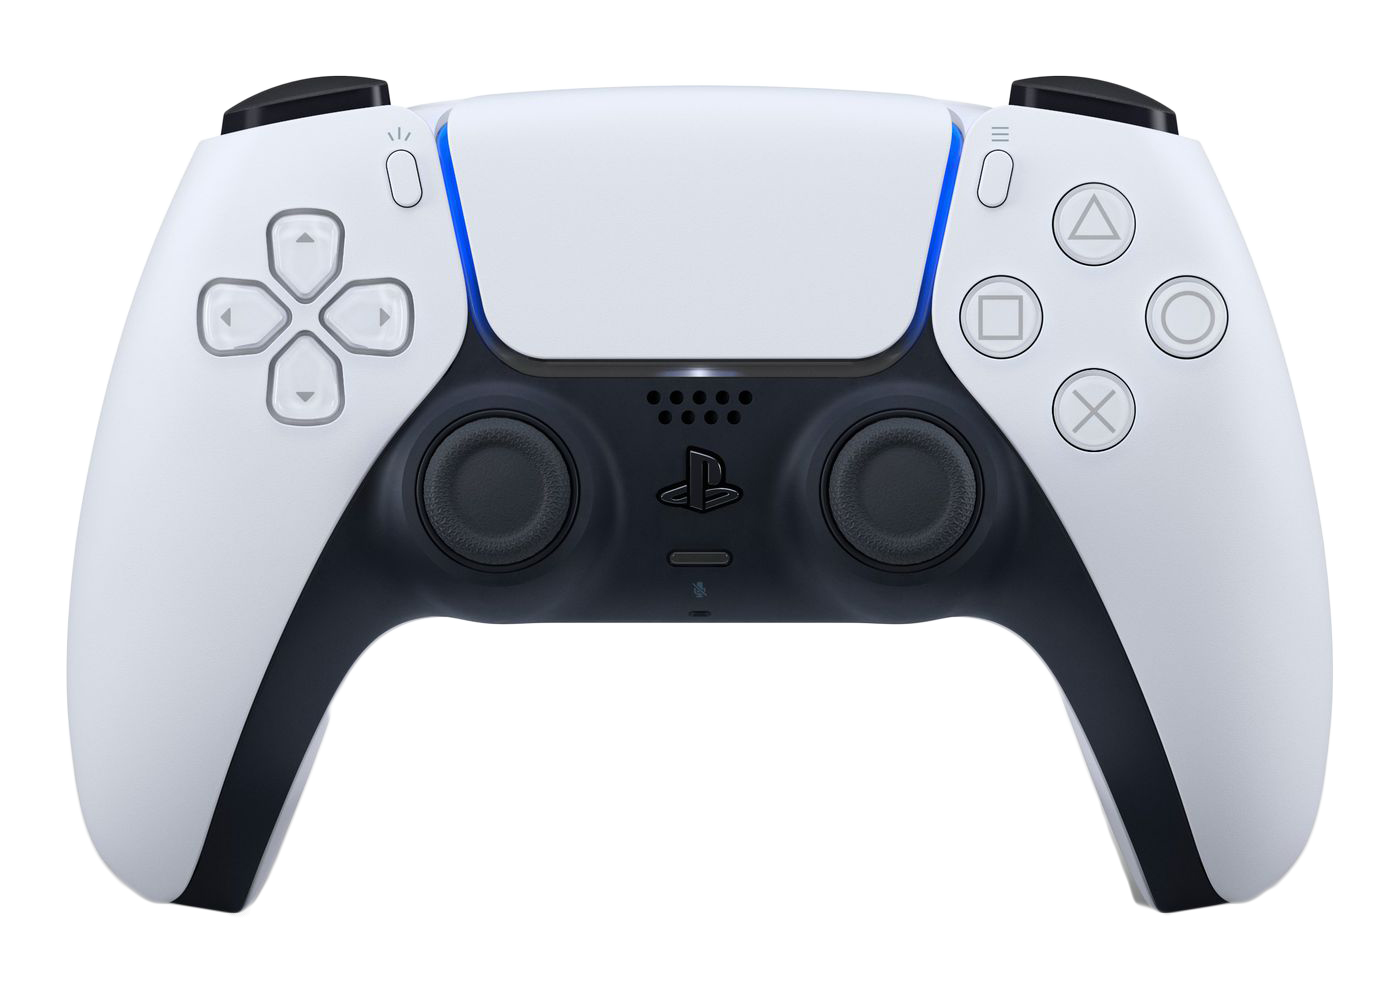 how much is the ps5 controller cost